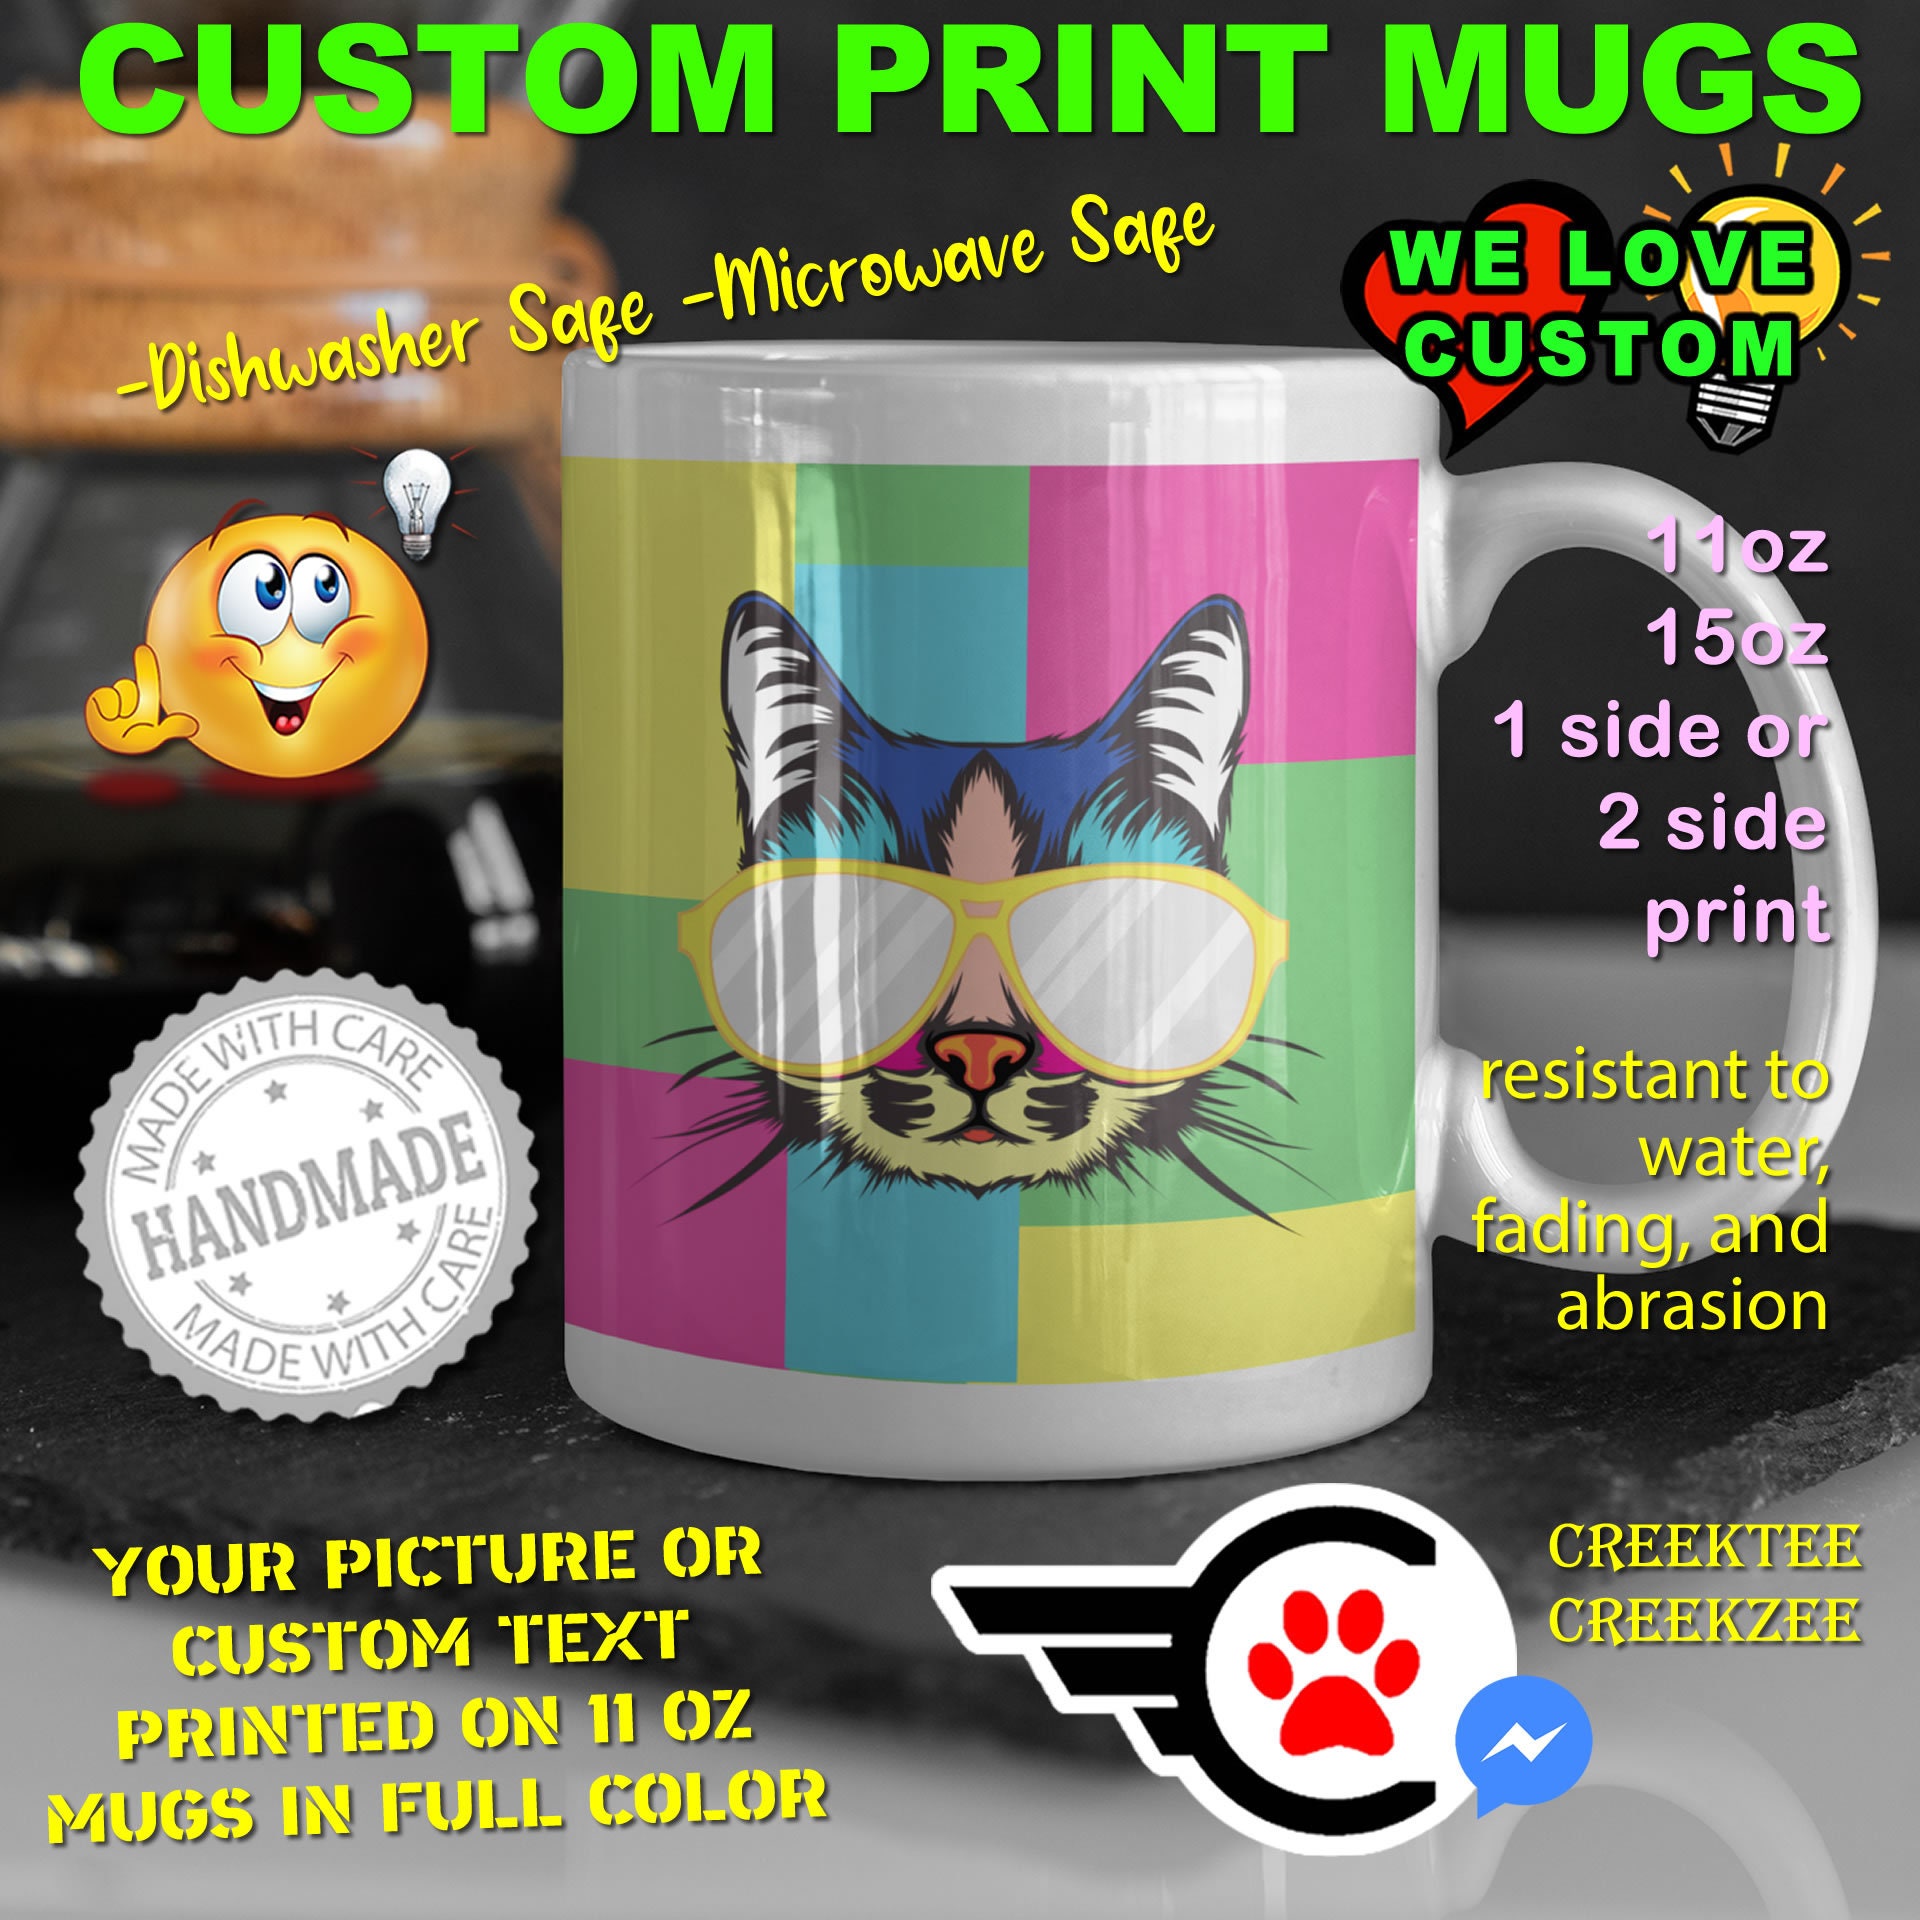 Cool Cat Mug or Your Logo or Custom Personalized Coffee Mugs, Your photo, image or text printed on a 11 or 15 oz White Mug